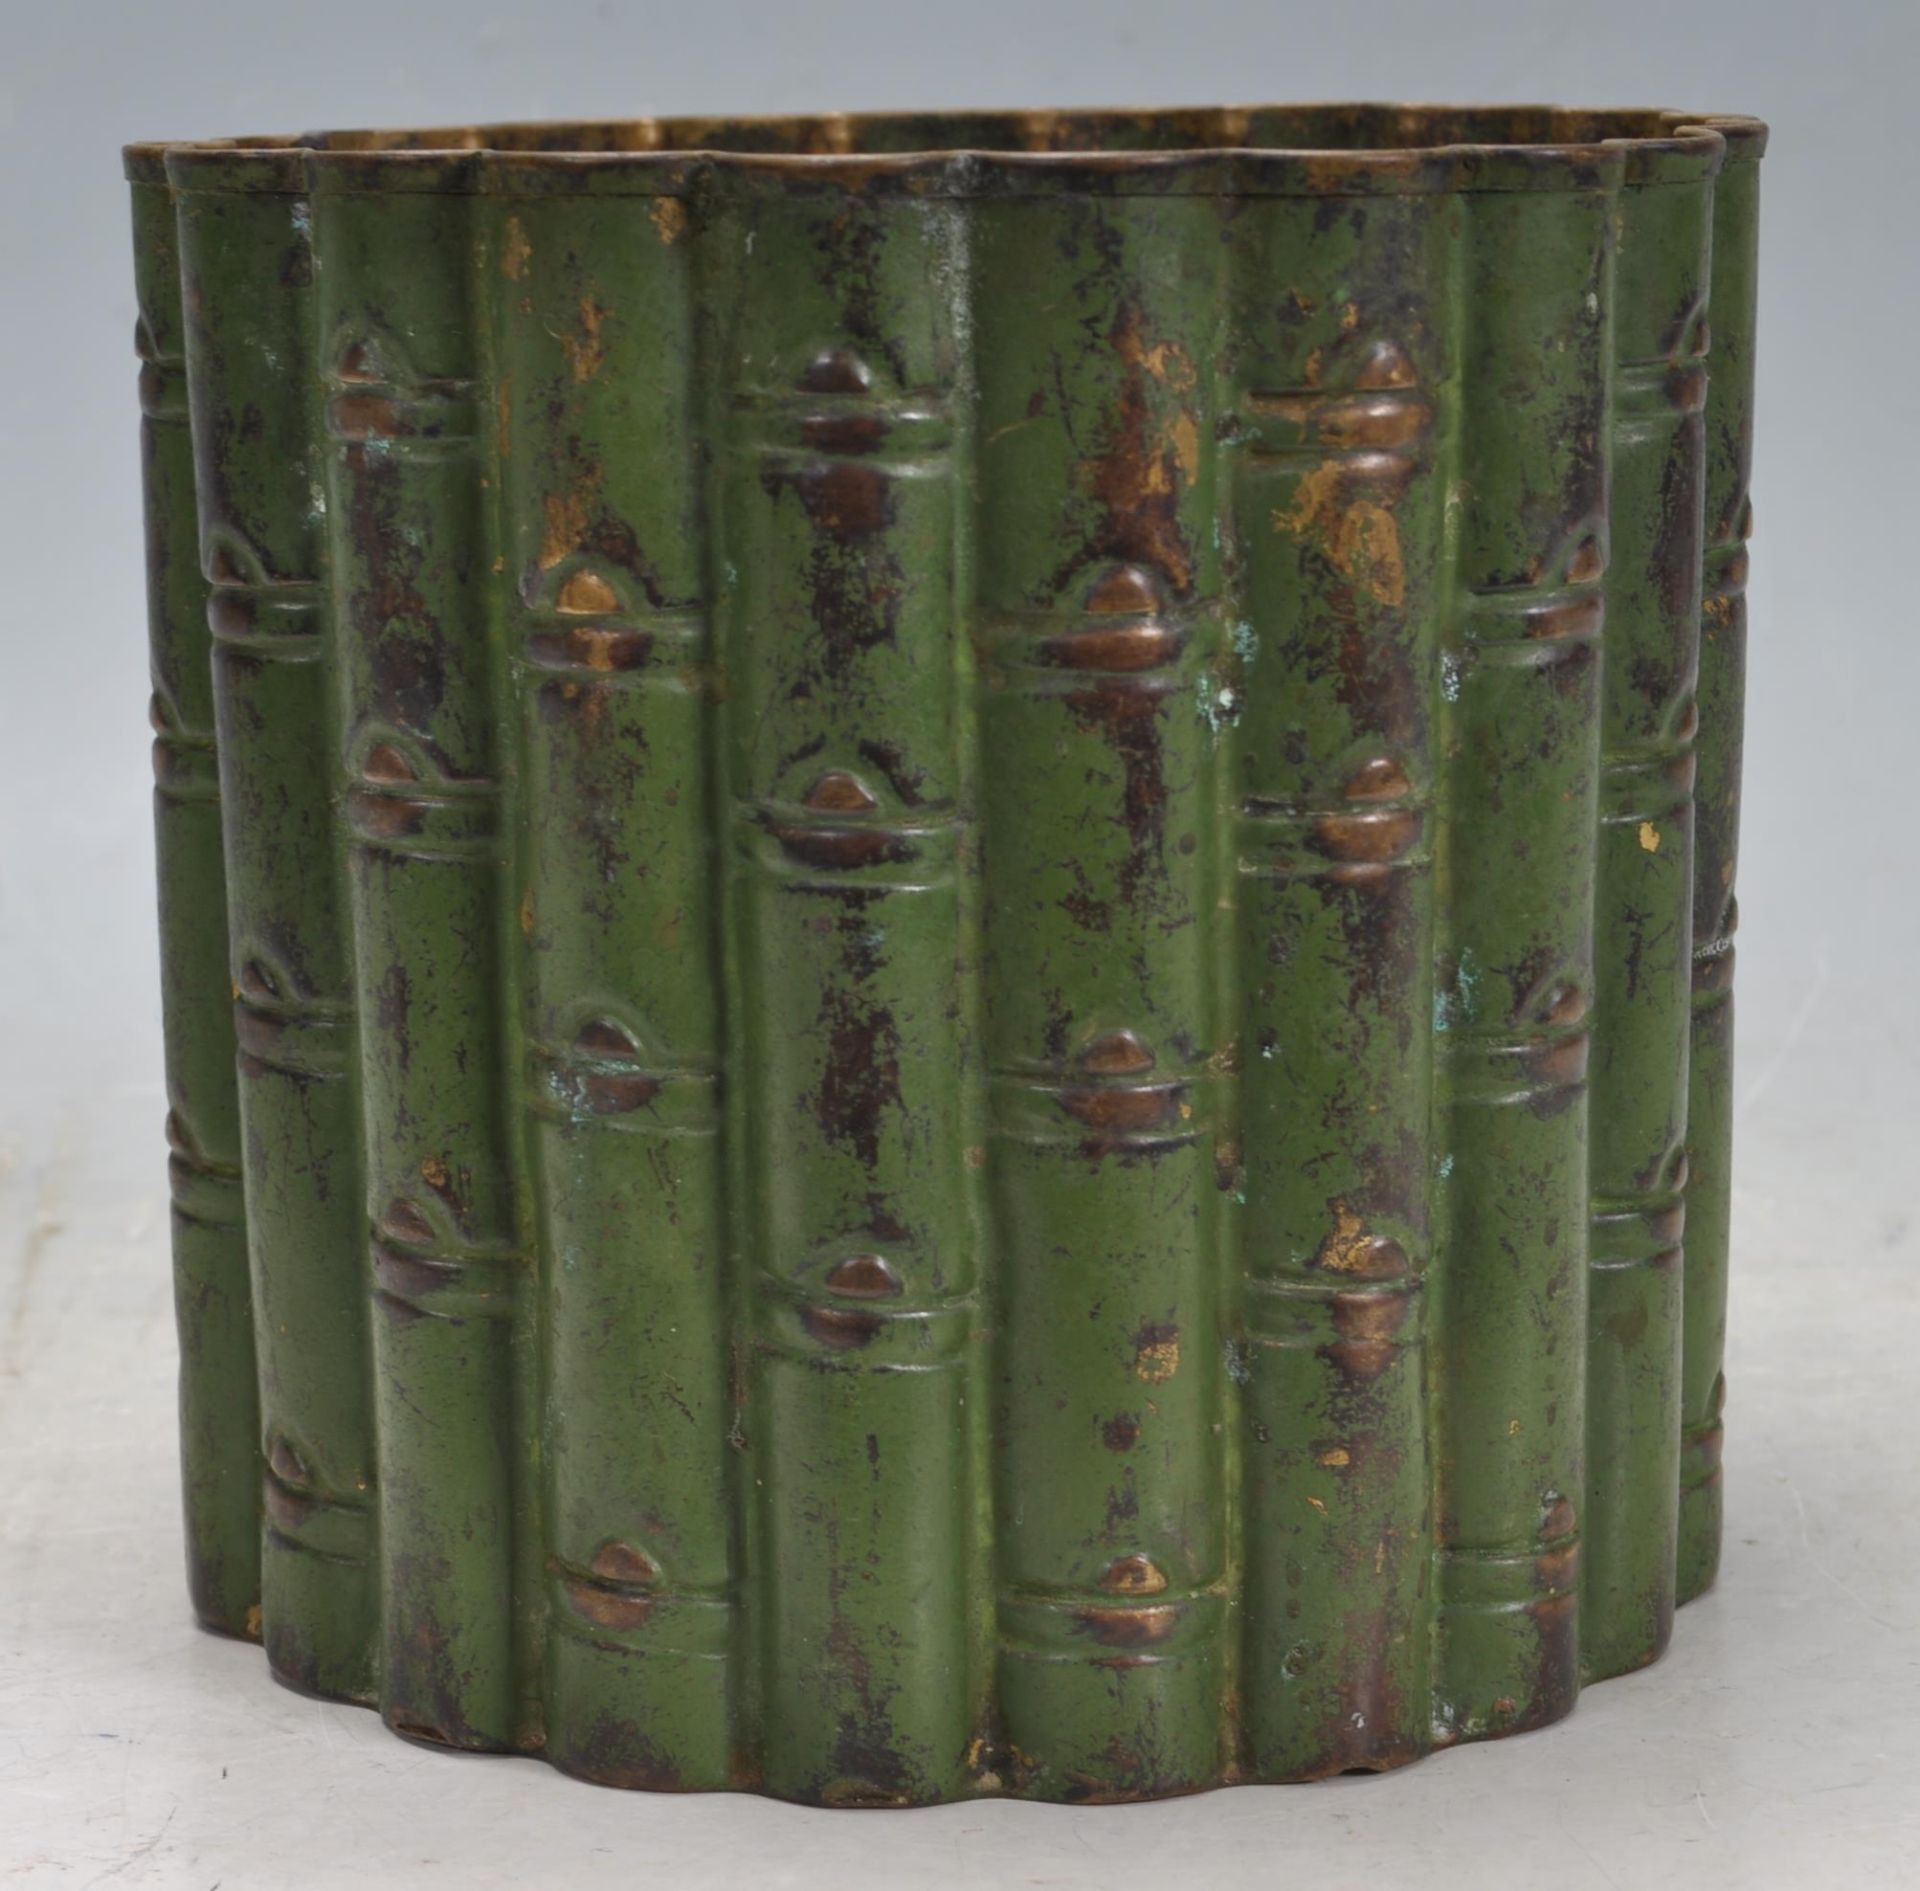 EARLY 20TH CENTURY 1920S FAUX BAMBOO METAL JARDINIERE - Image 3 of 5